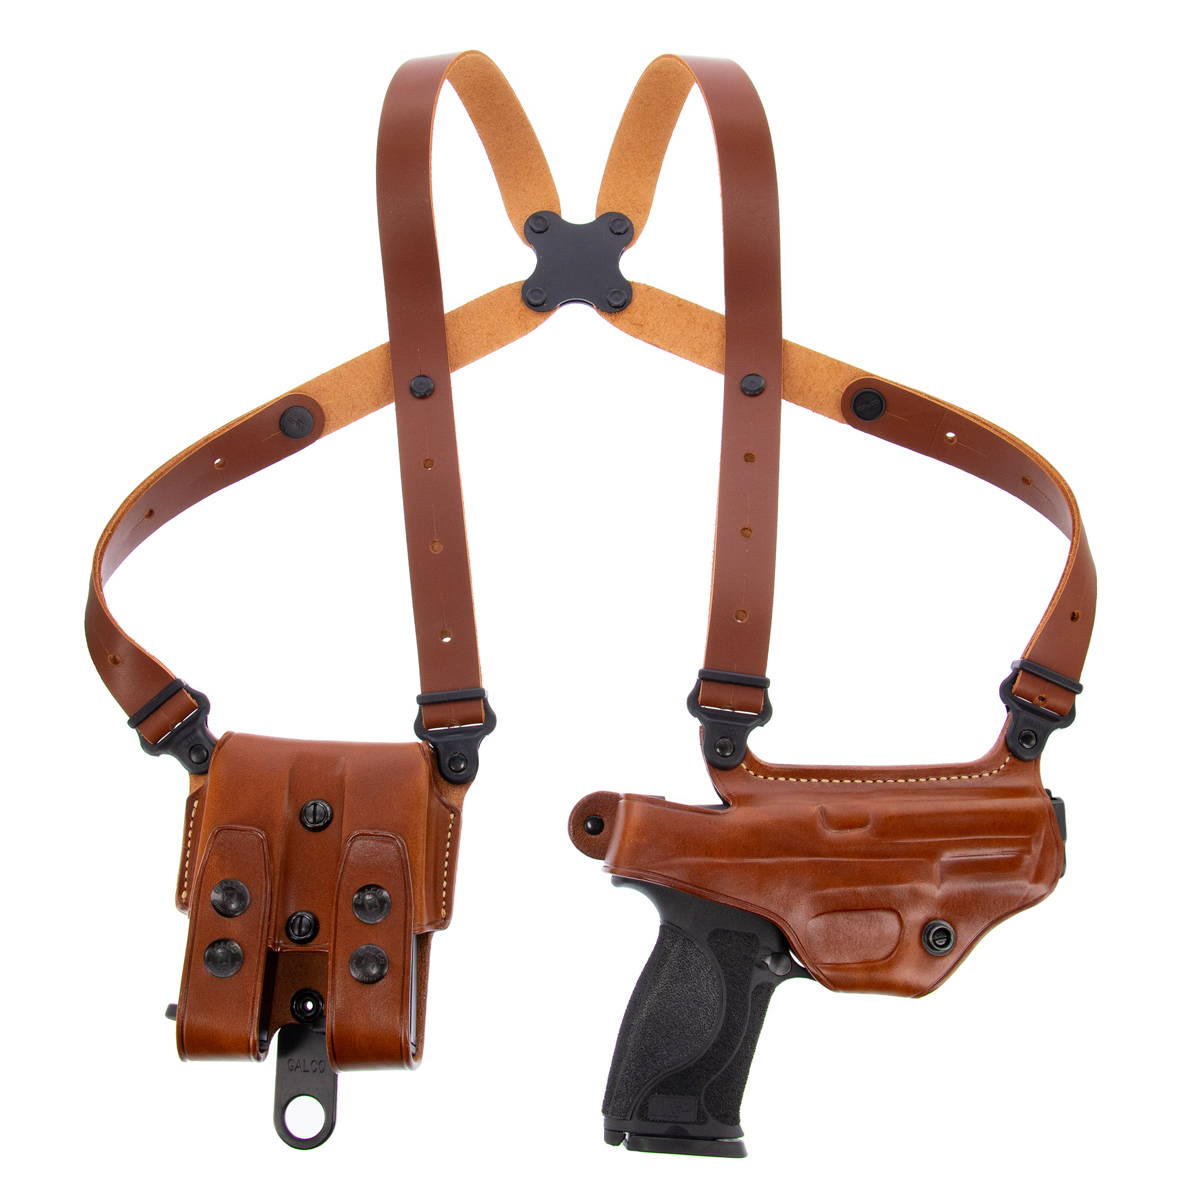 Galco Miami Classic shoulder holster photo credit Galco